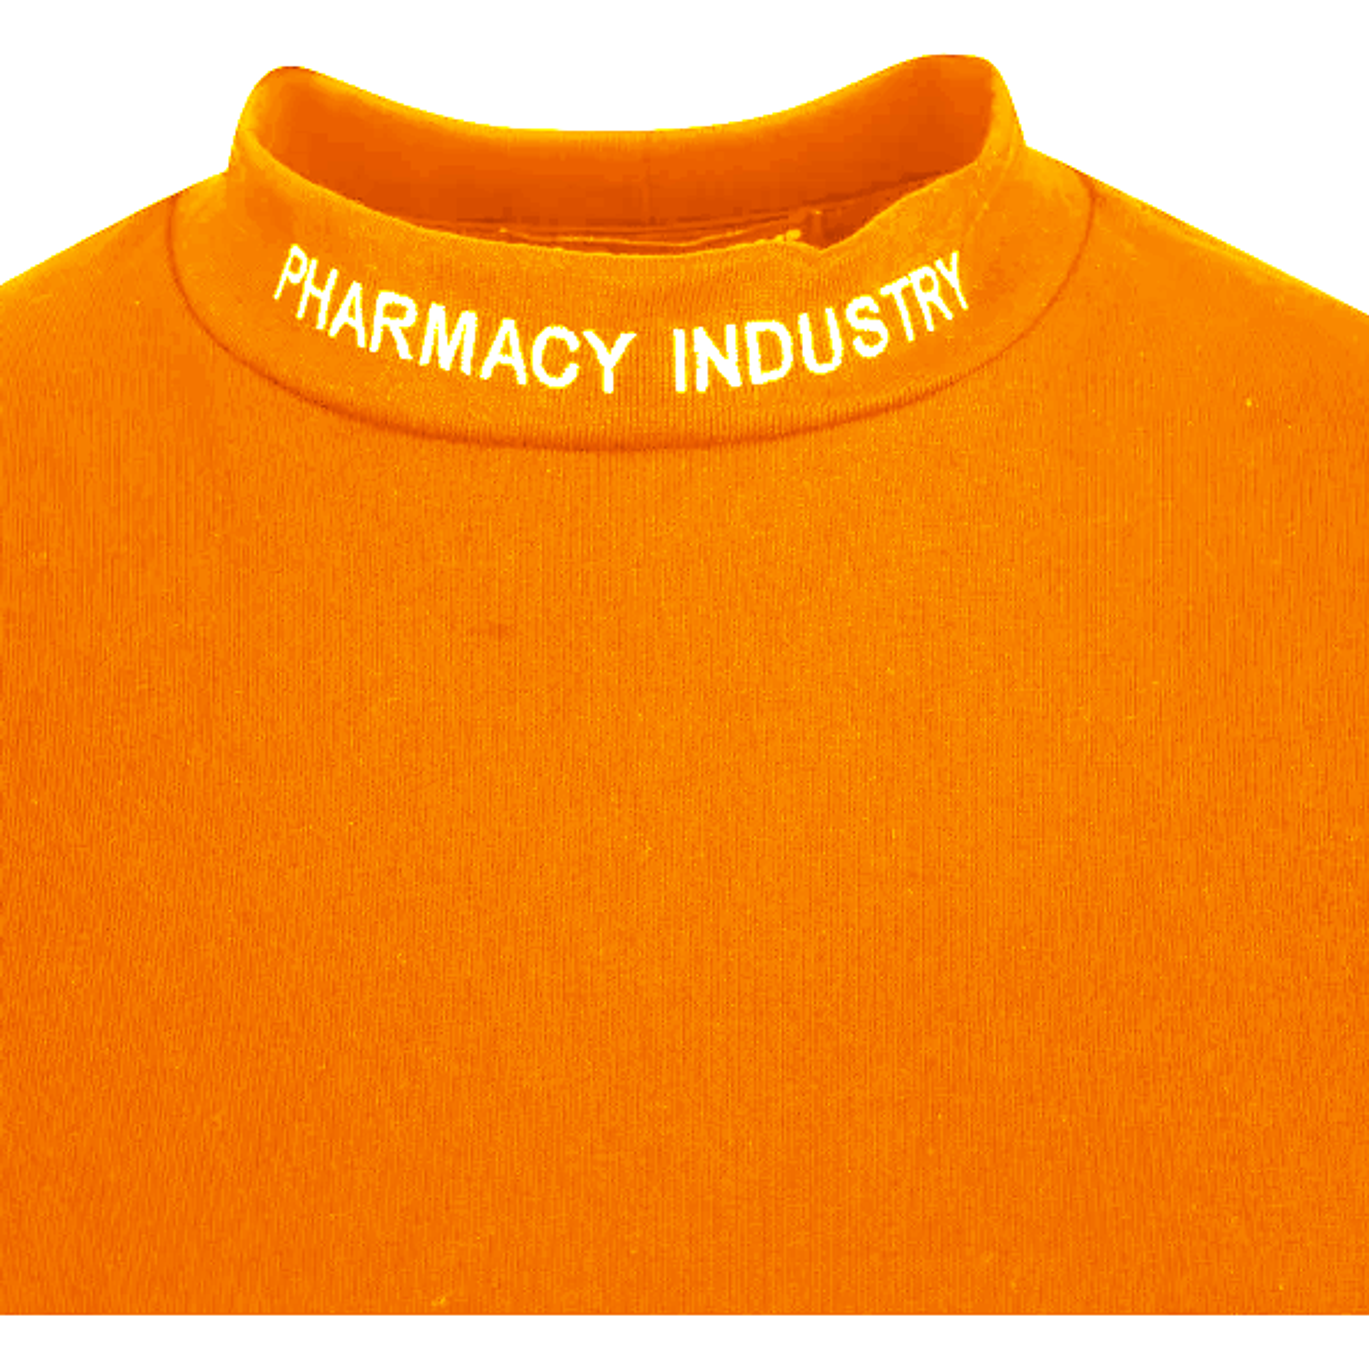 Pharmacy Industry Chic Embroidered Collar Tee orange-cotton-tops-t-shirt-3 product-9713-293172433-d8abb037-b35.png